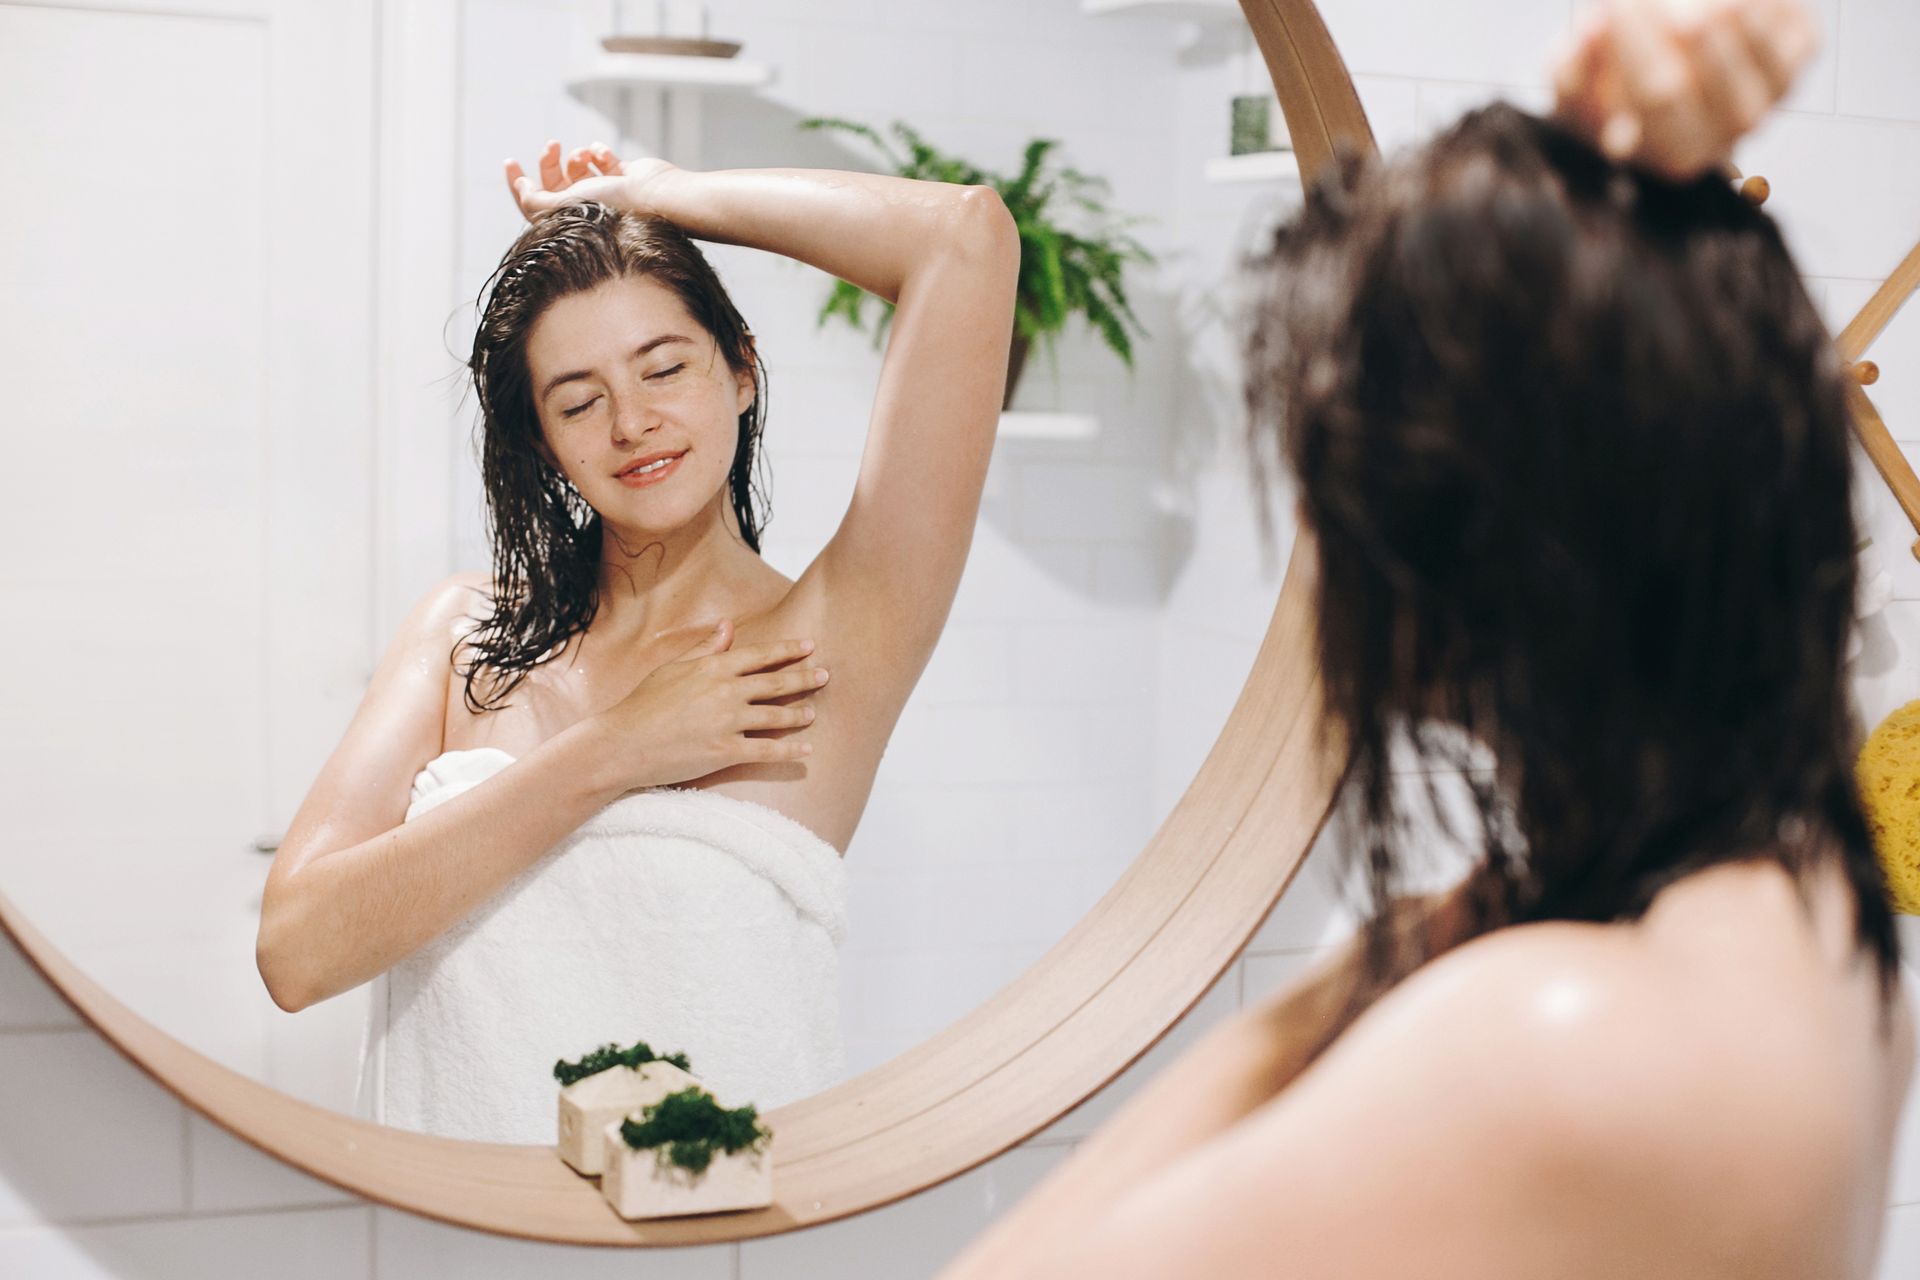 a woman wrapped in a towel looks at her reflection in a bathroom mirror